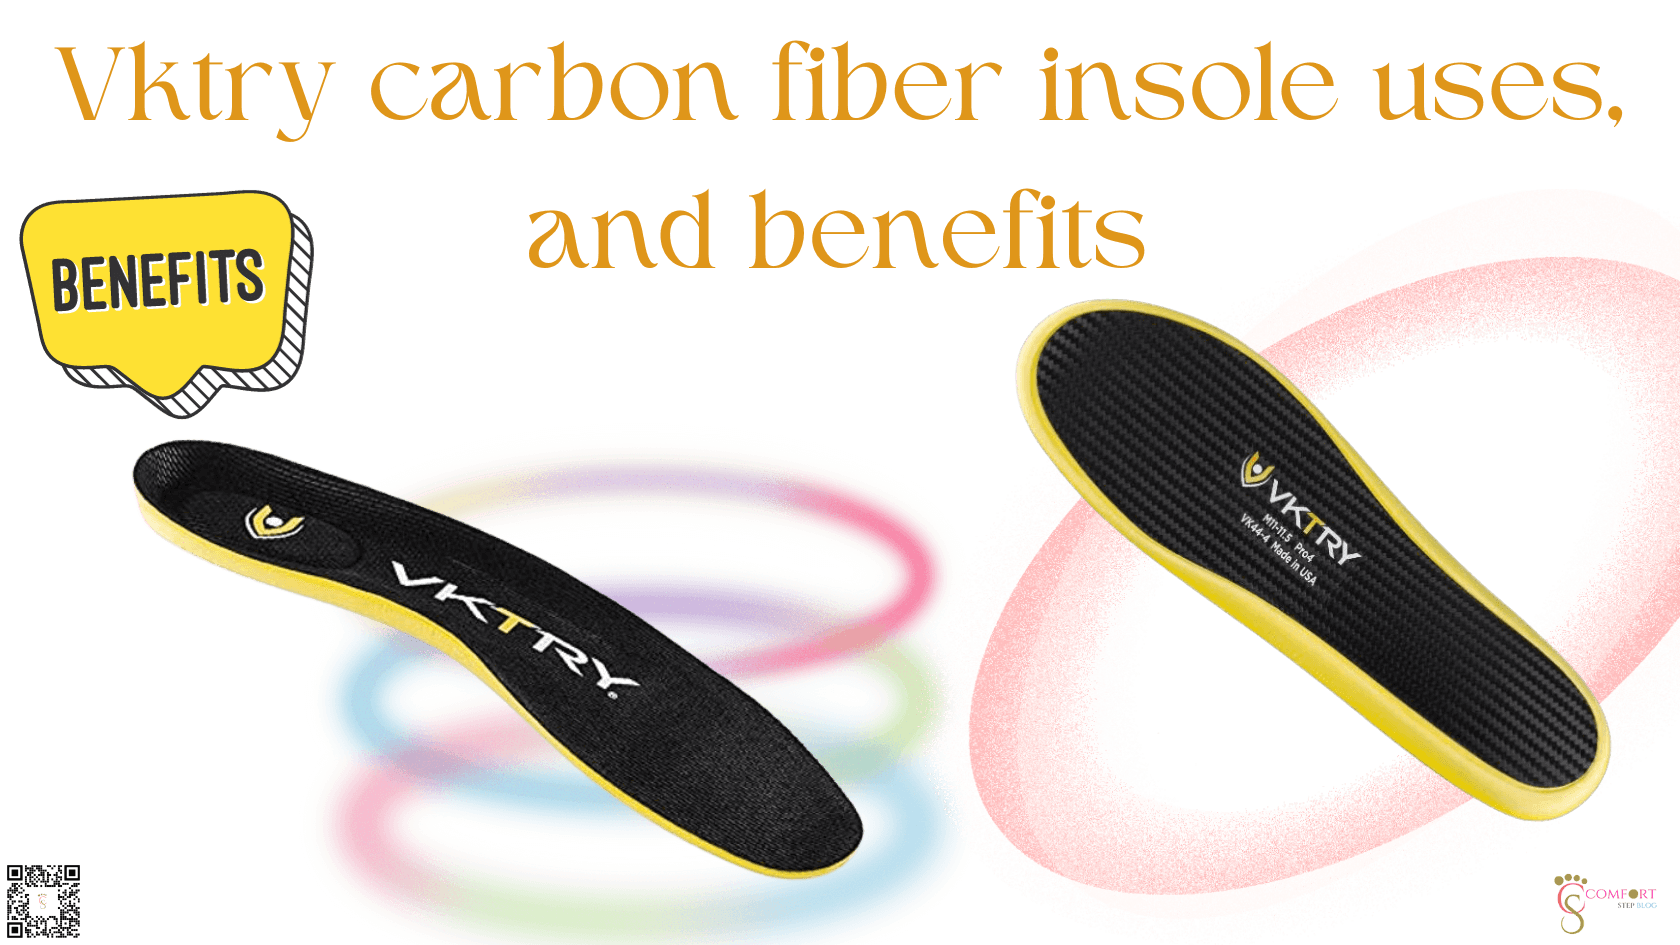 Vktry Carbon Fiber Insole Uses, and Benefits